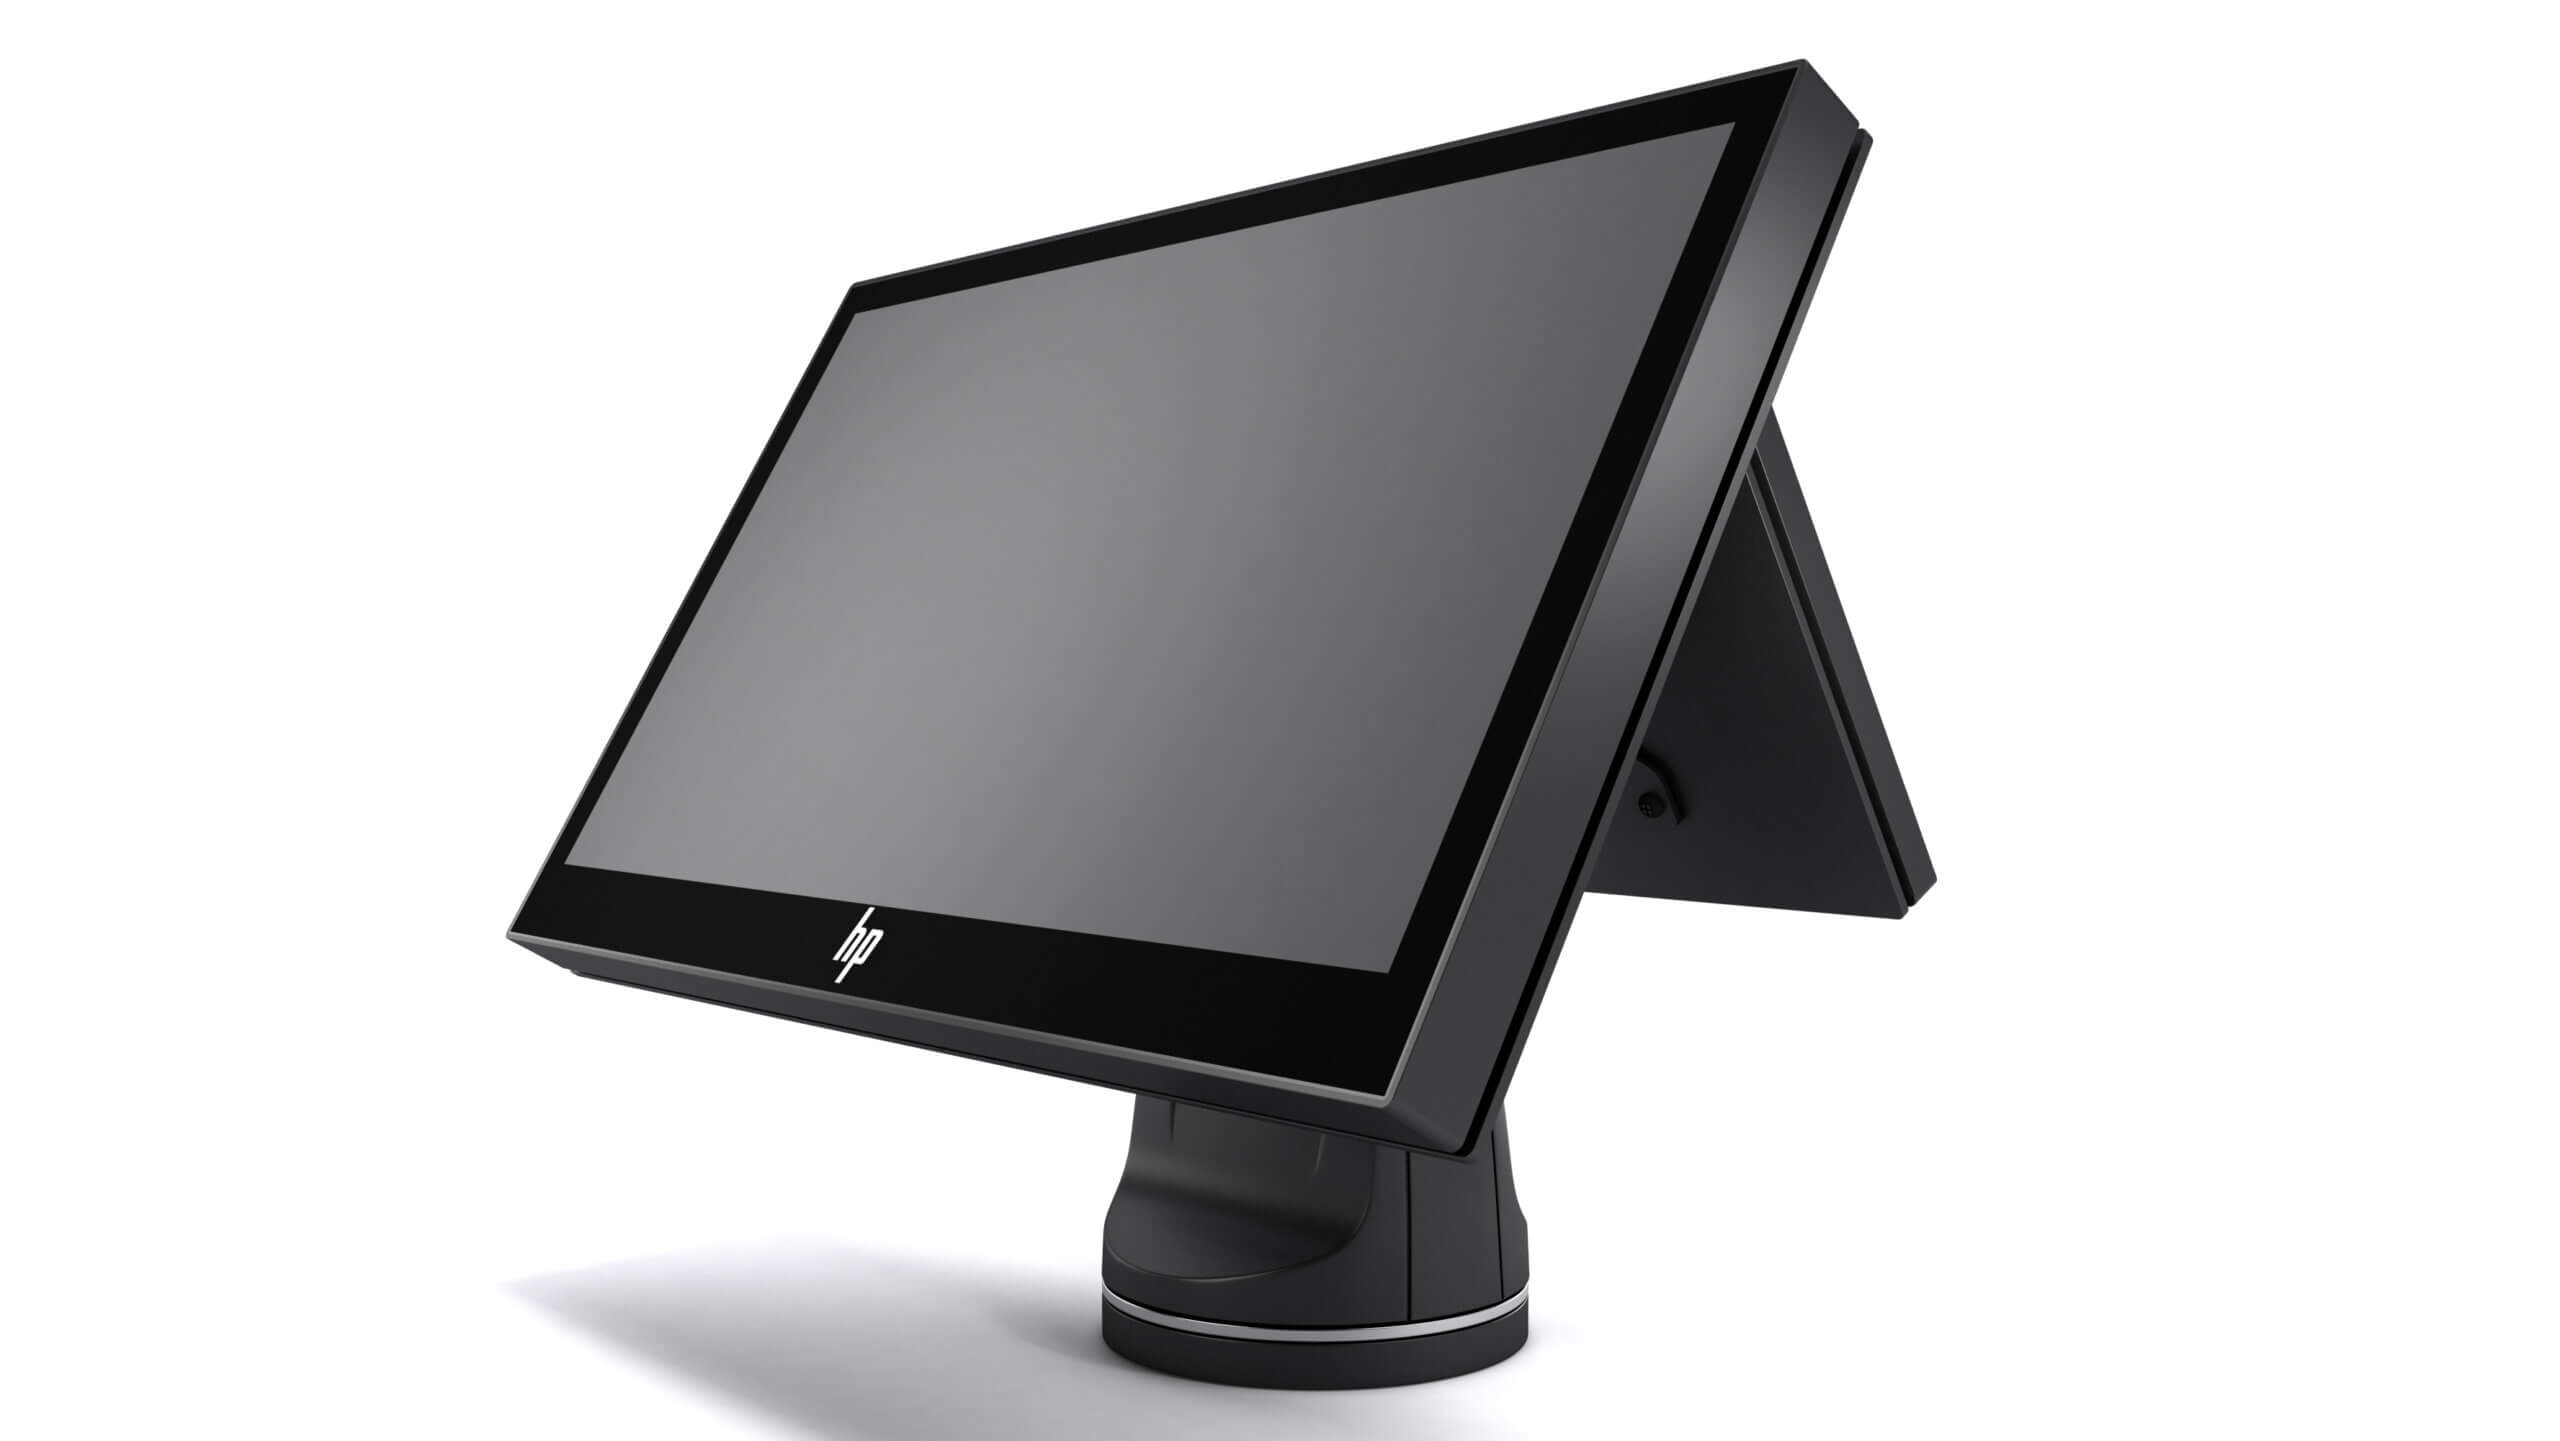 HP Engage Display Stands